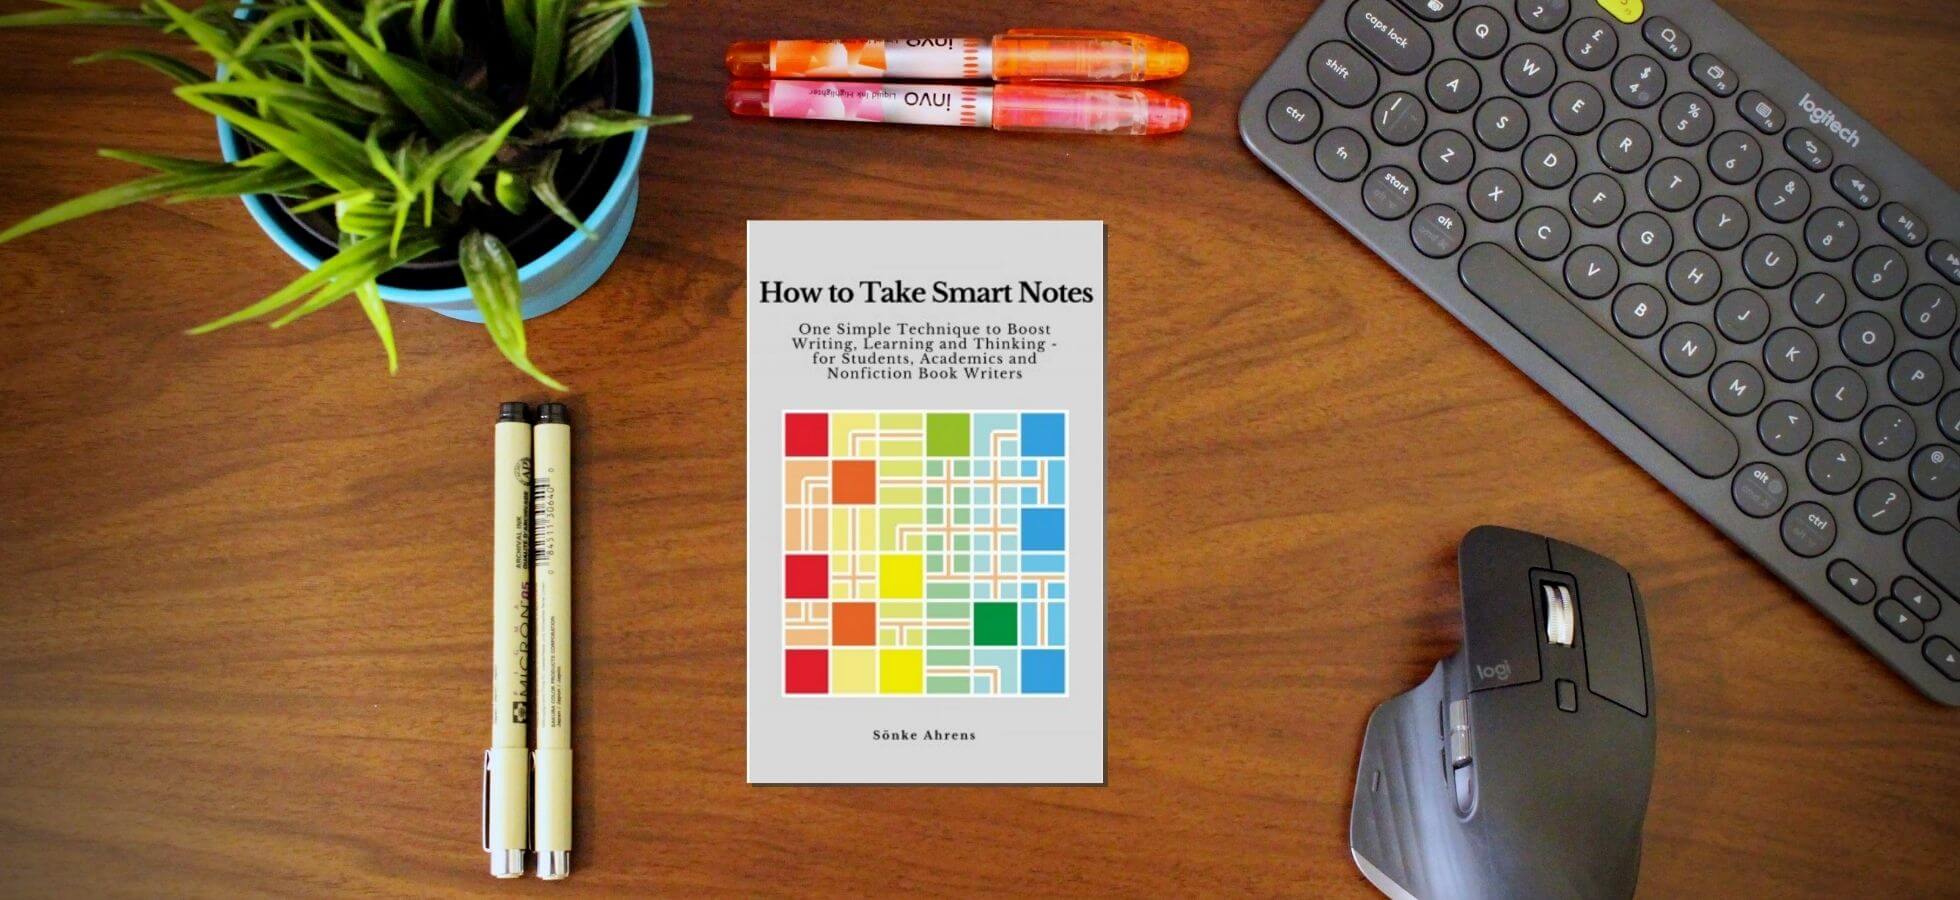 How To Take Smart Notes by Sönke Ahrens – Book Notes, Summary, Review - Cover Image